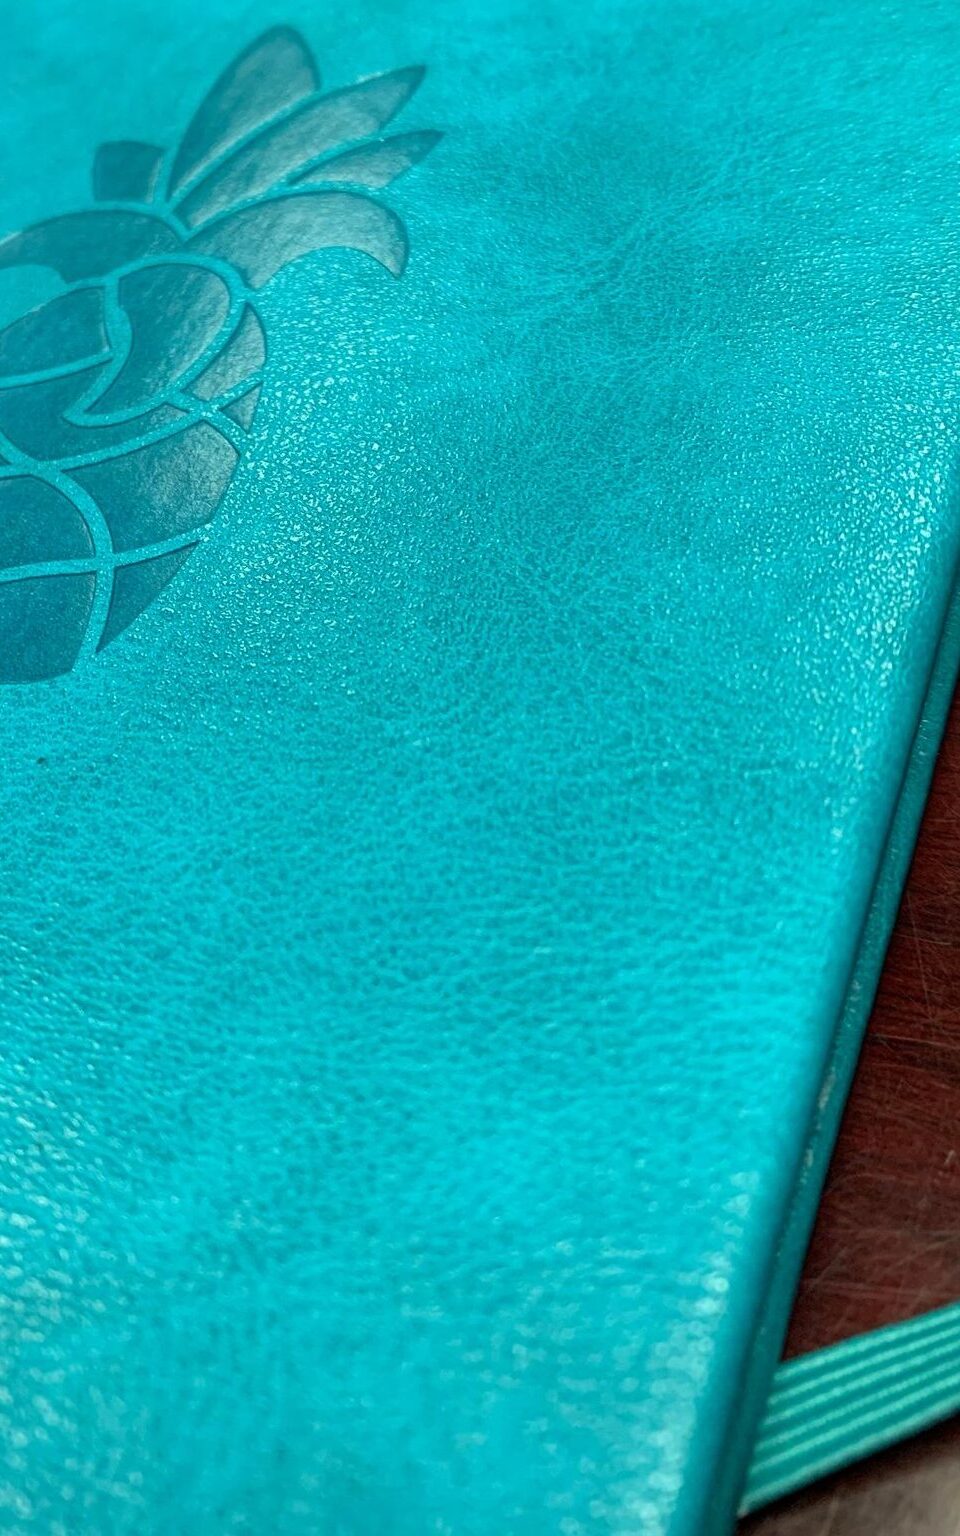 Example of Imitation Leather Covers